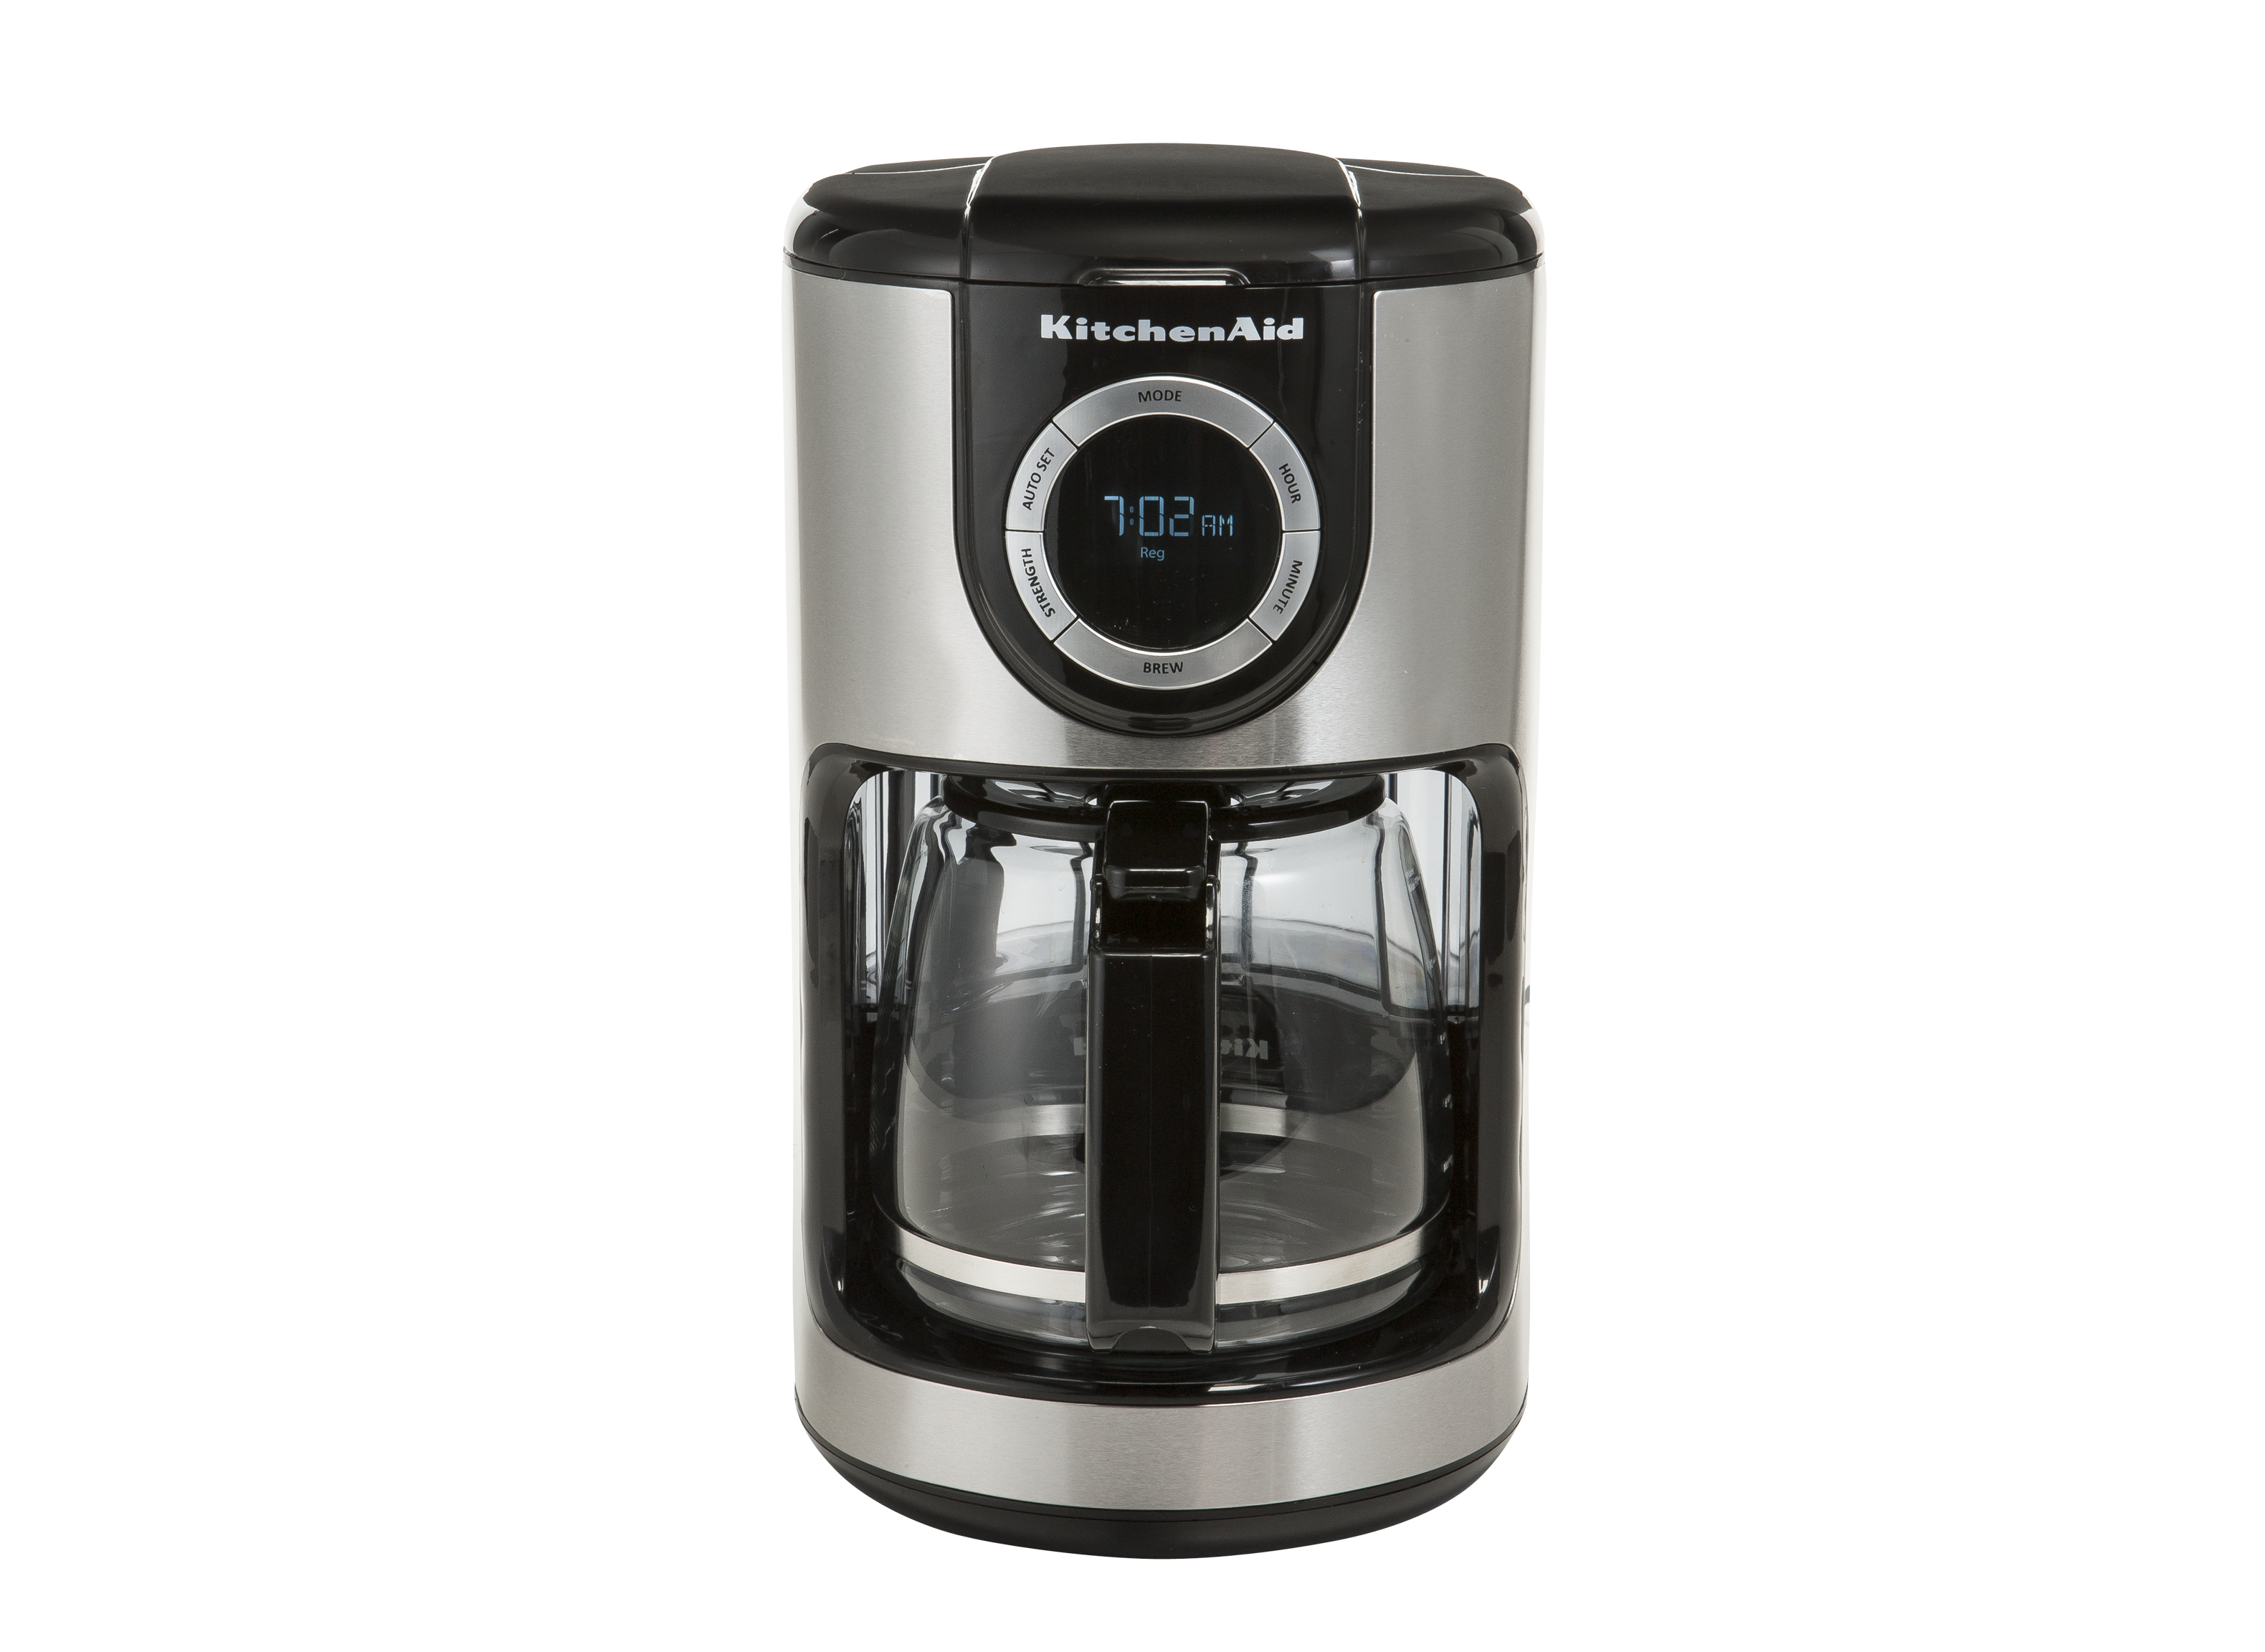 https://crdms.images.consumerreports.org/prod/products/cr/models/291724-coffeemakers-kitchenaid-kcm1202ob.png